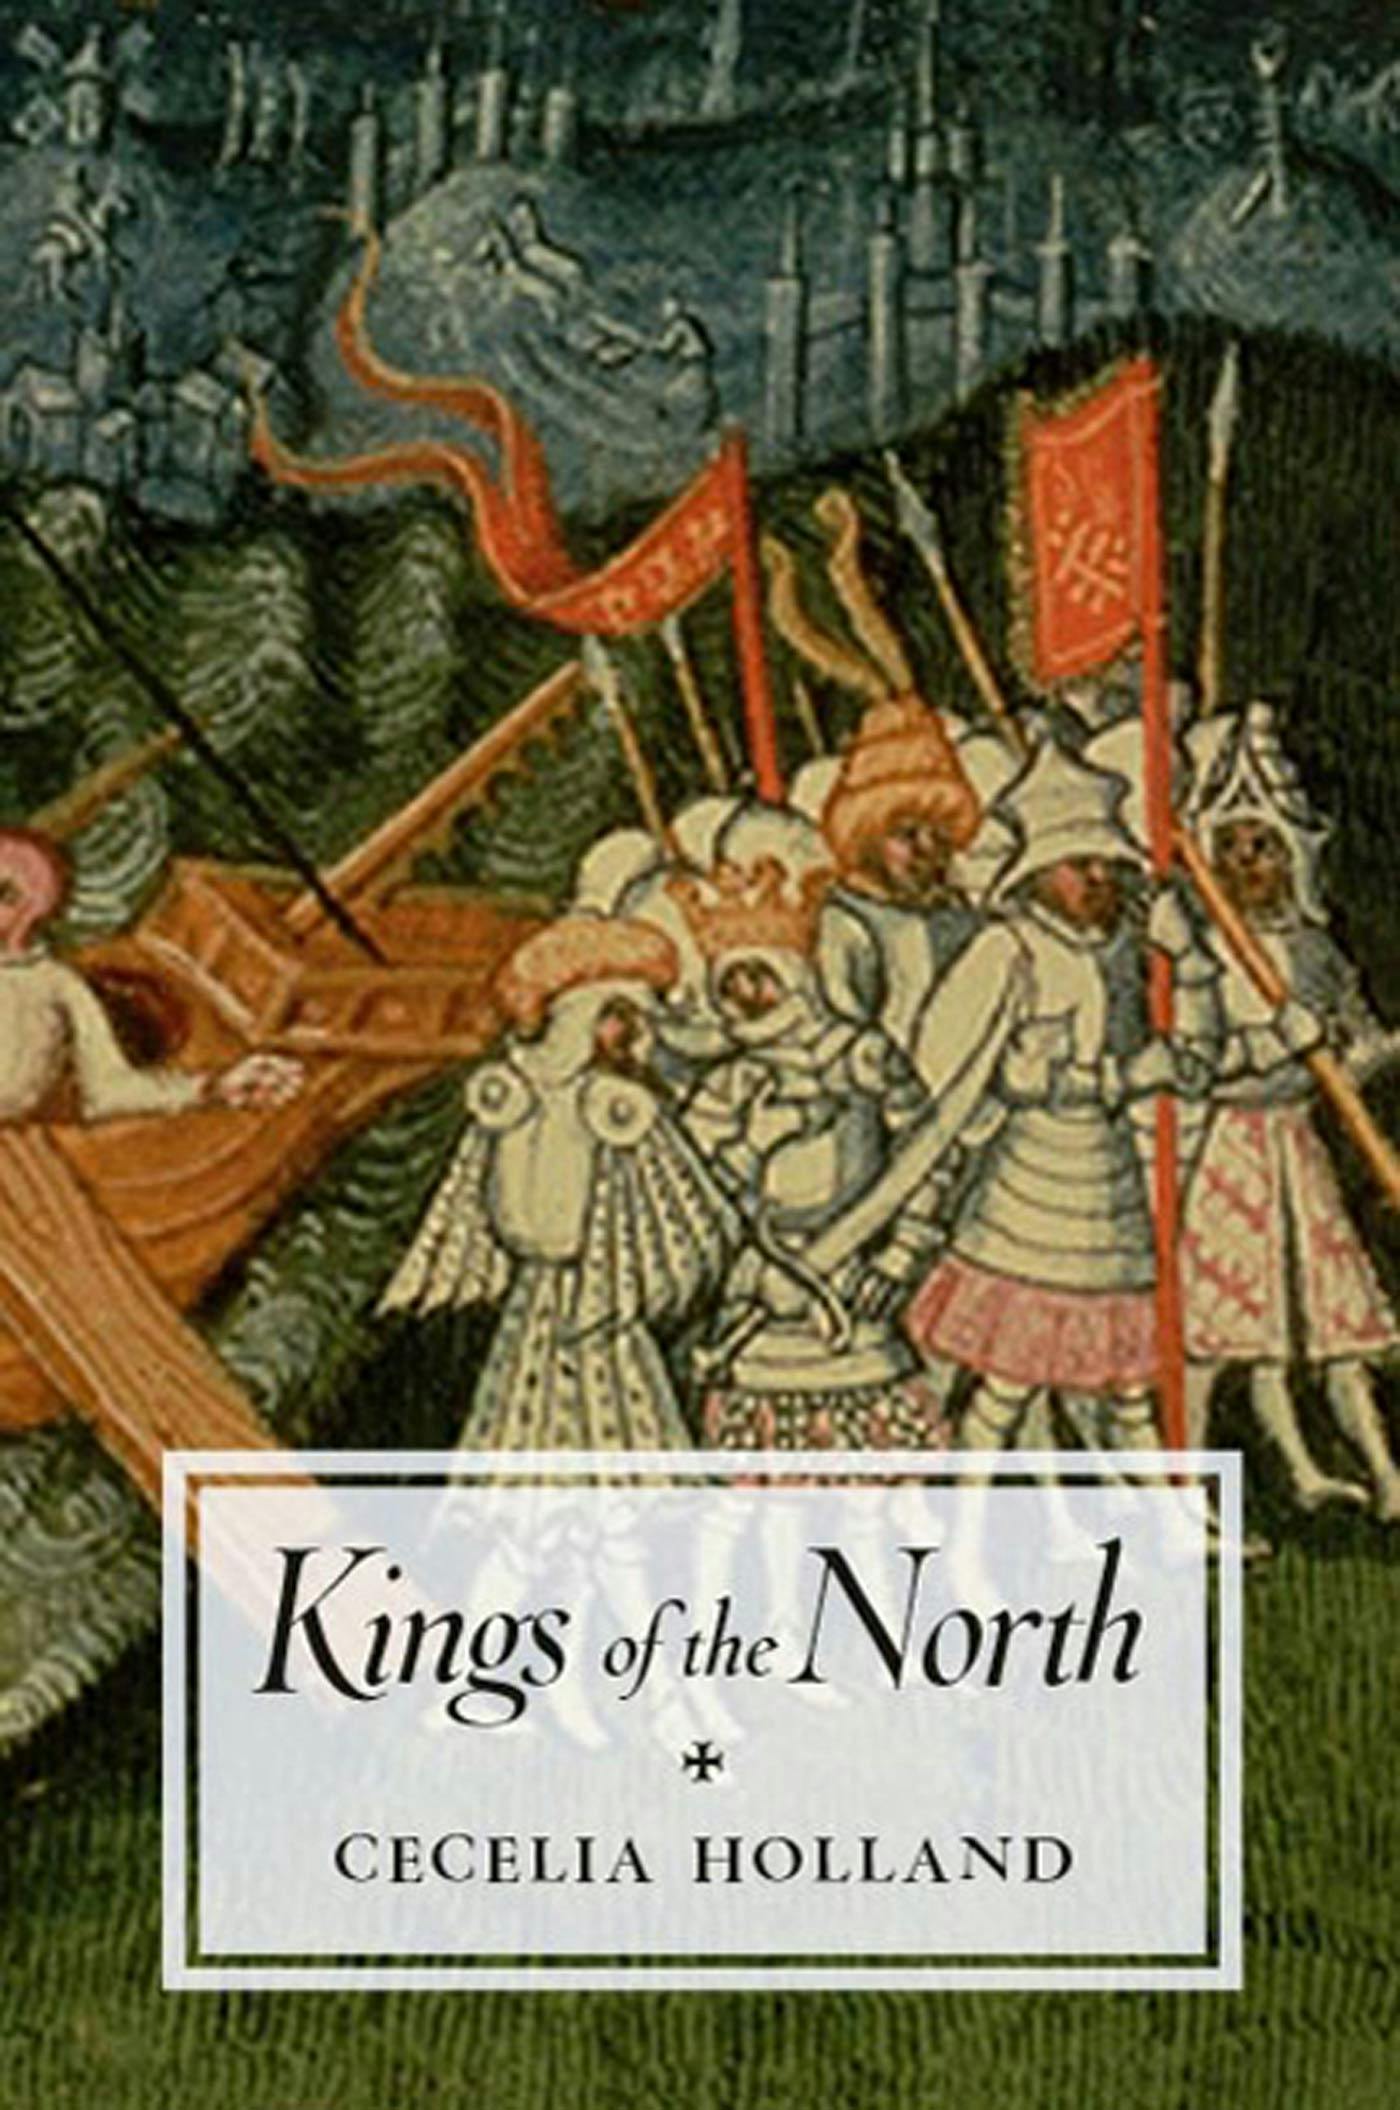 Cover for the book titled as: Kings of the North